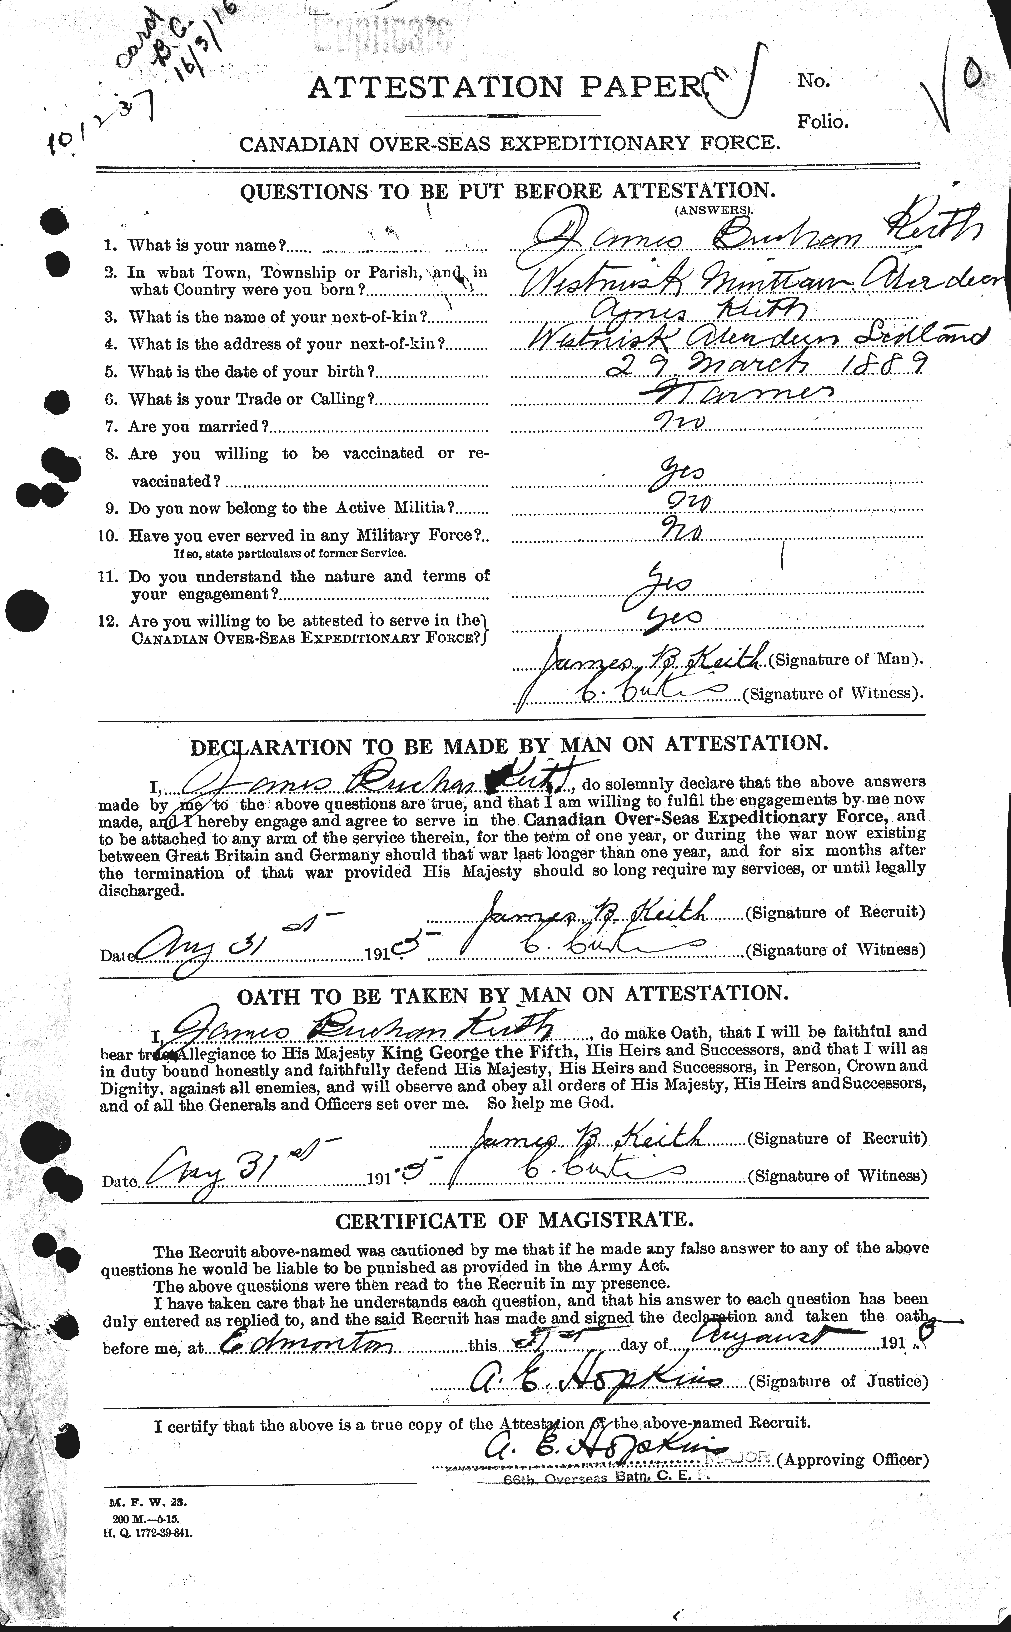 Personnel Records of the First World War - CEF 432458a